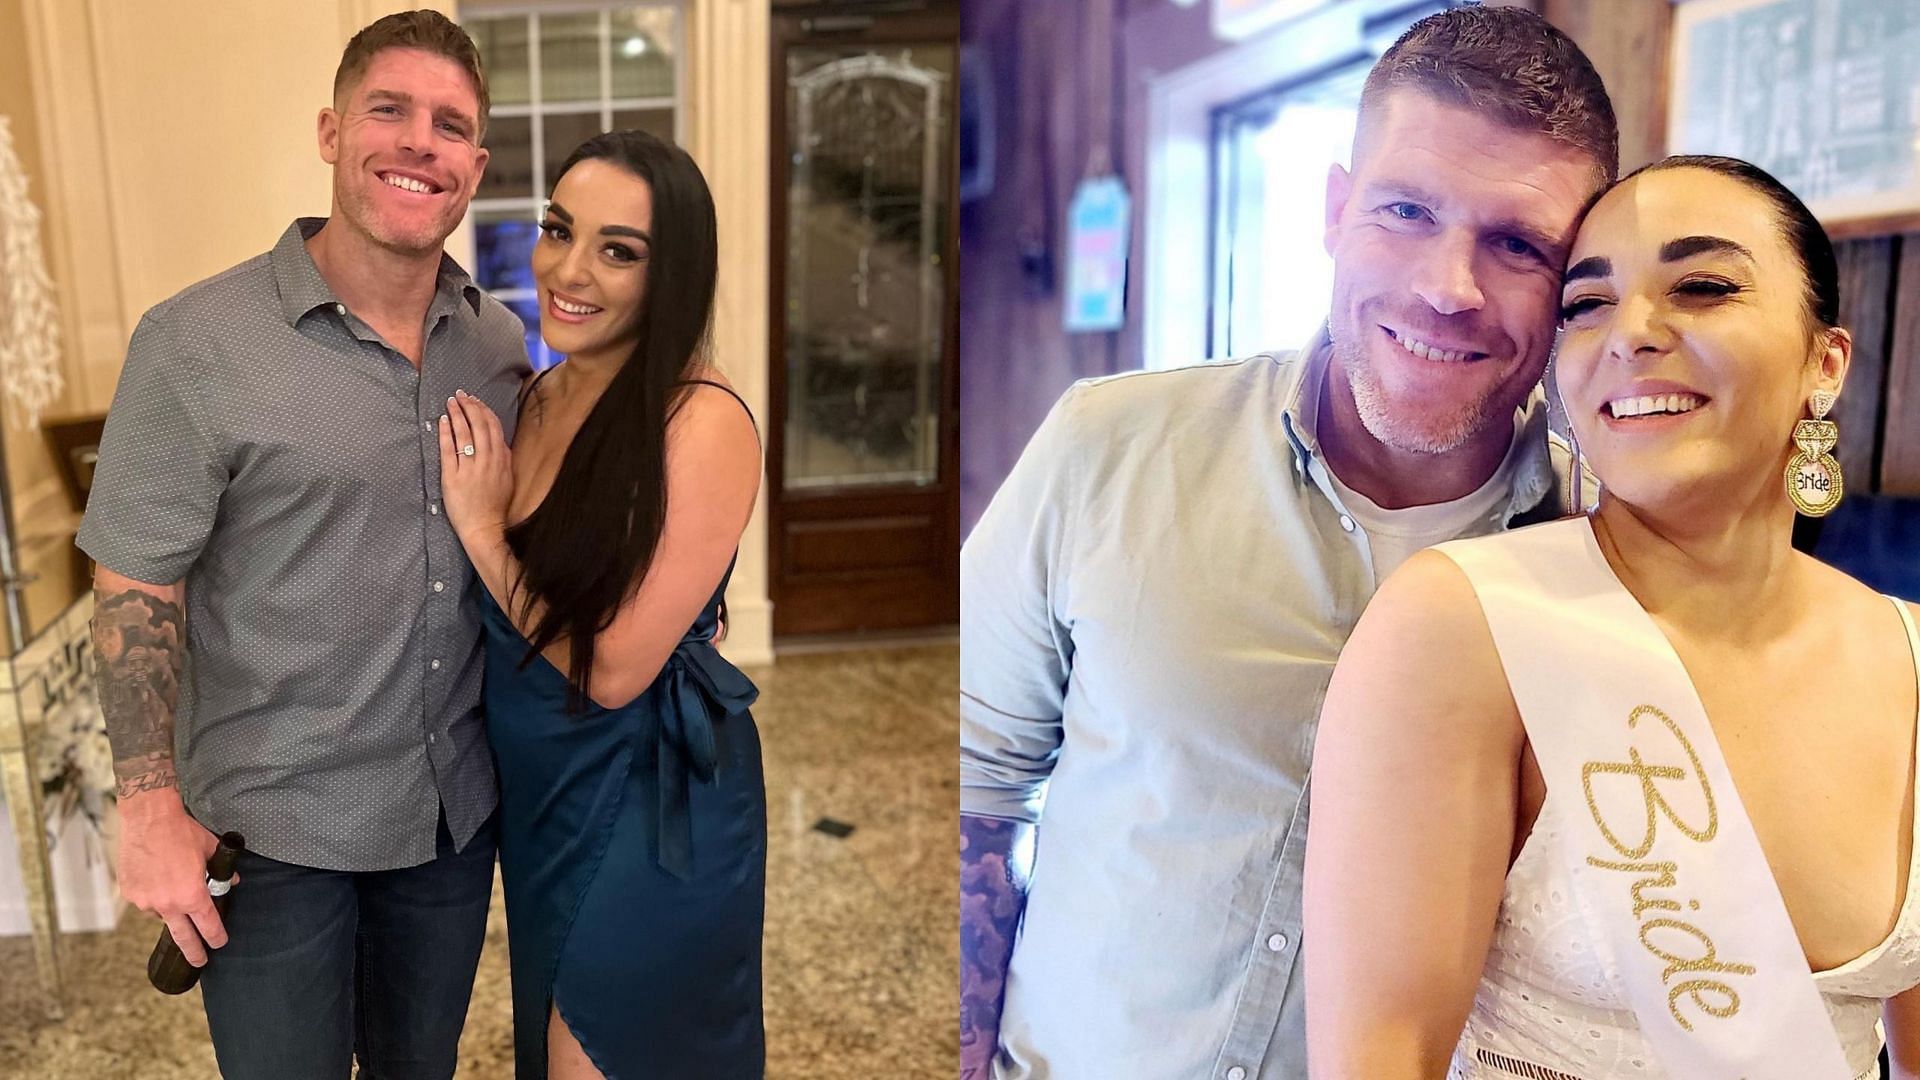 Deonna Purrazzo is engaged to Steve Maclin